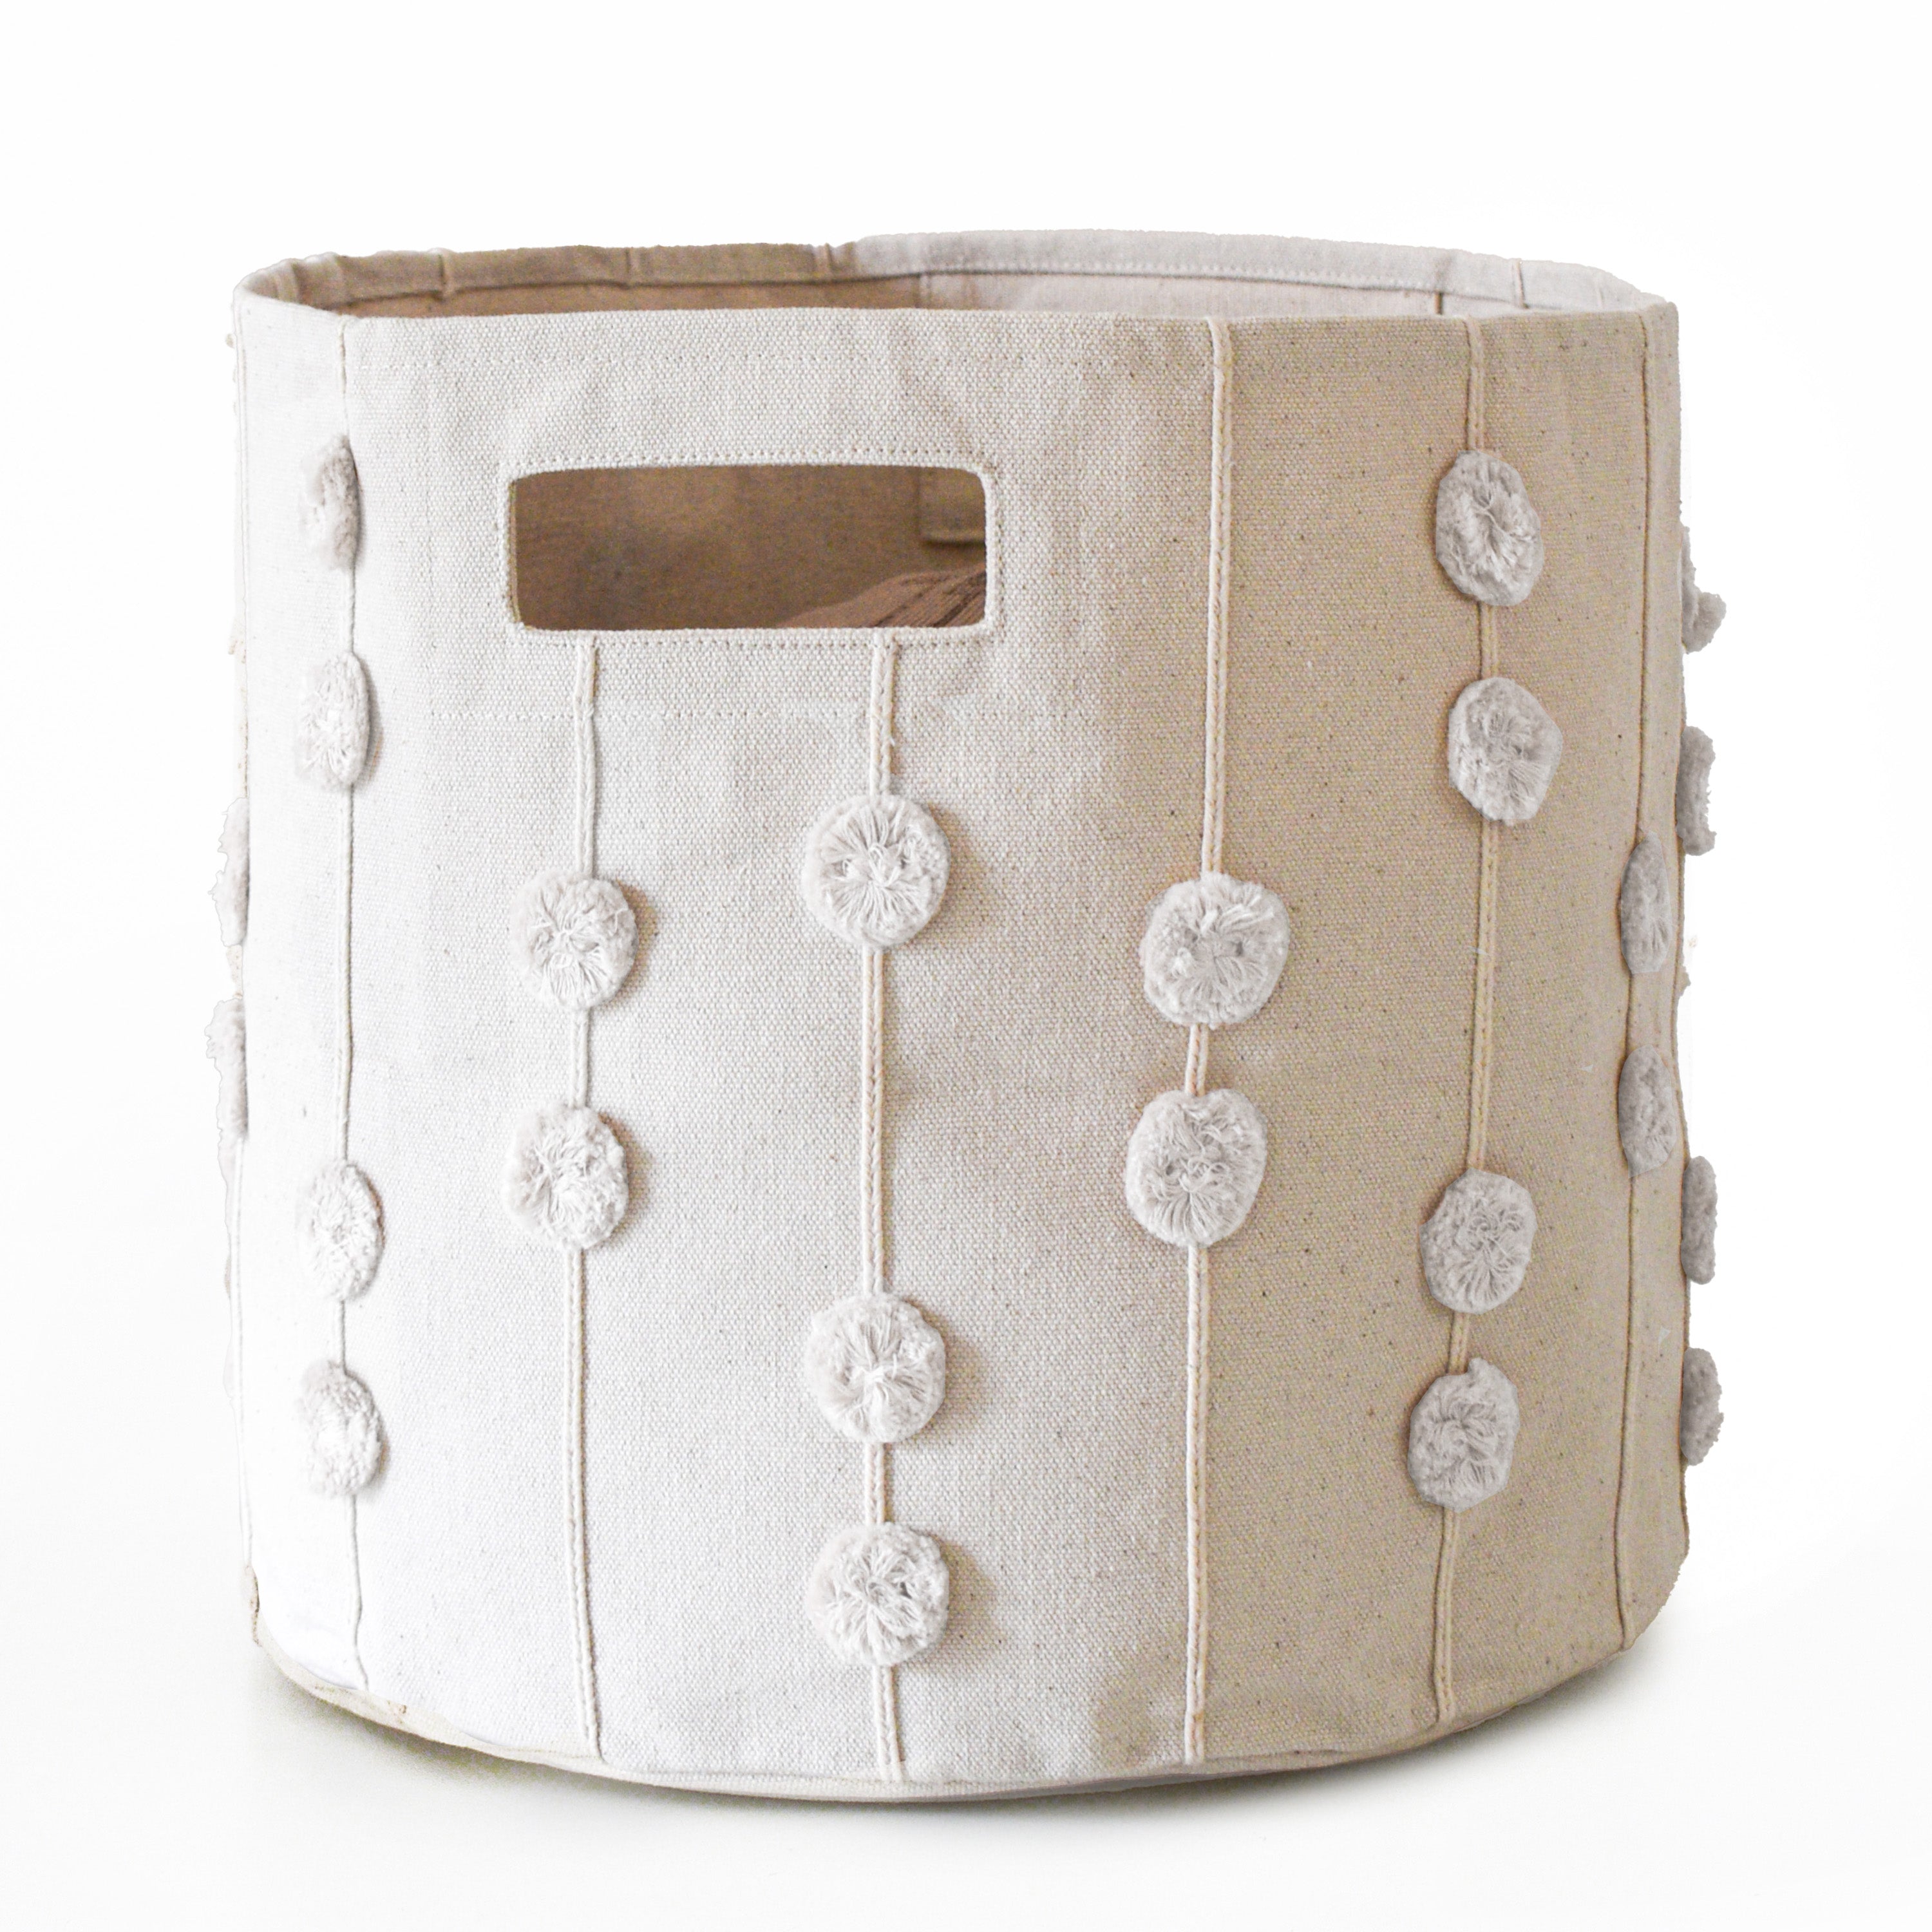 A Storage Basket Pompom Ivory by Makemake Organics with a window slot and vertical rows of decorative white pompoms against a white background.